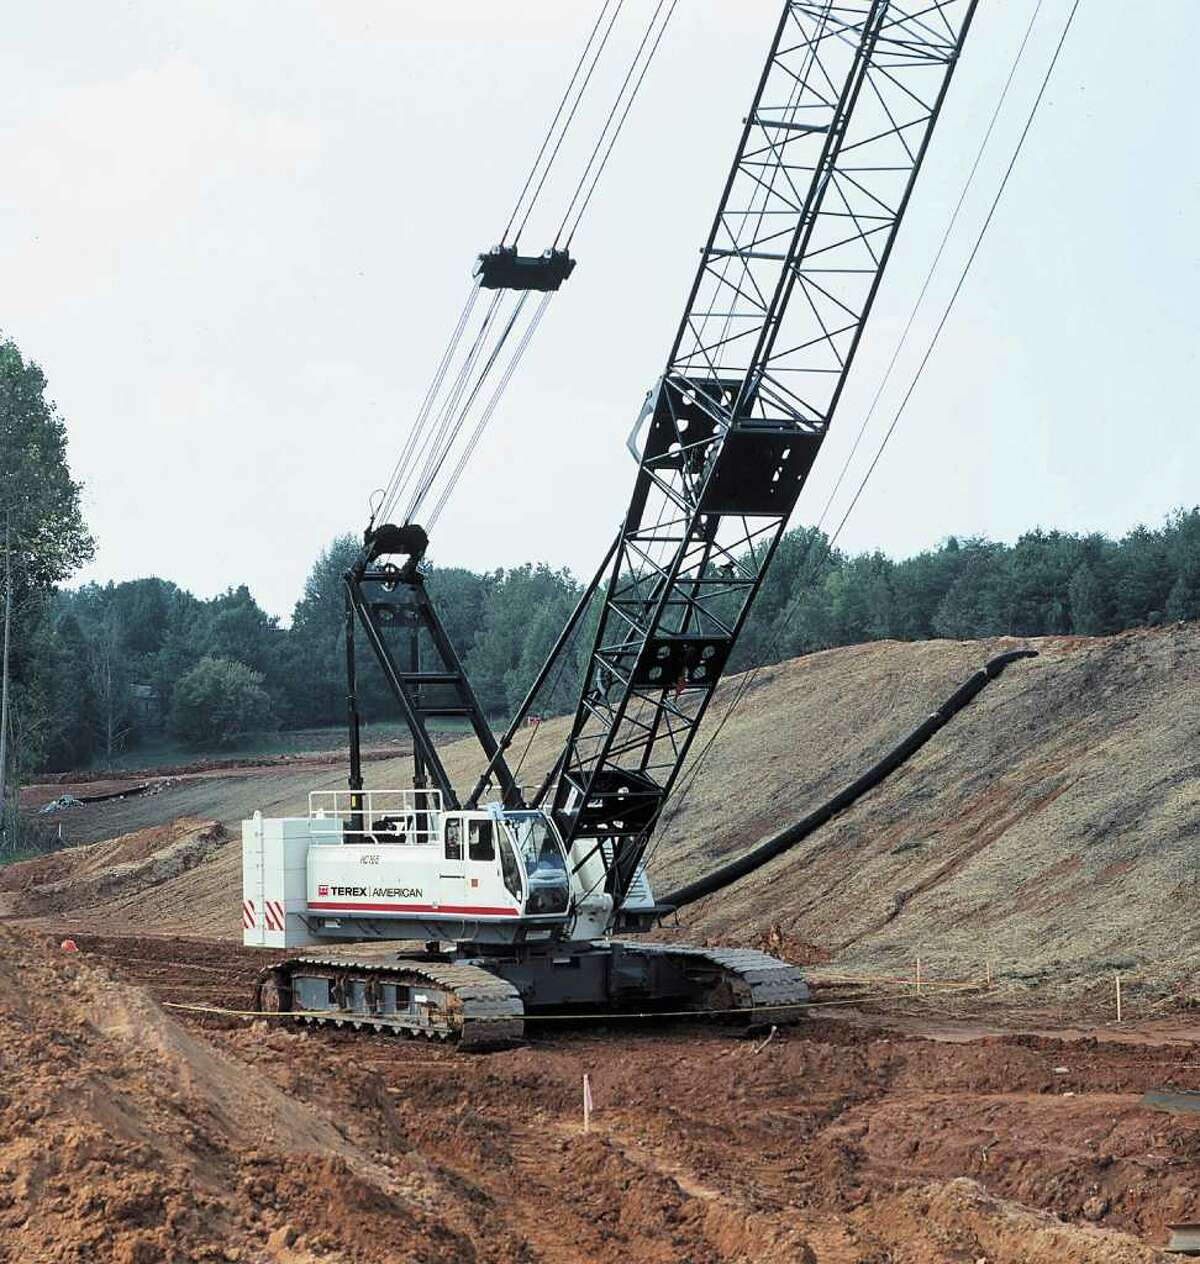 The crawler boom crane, a type of equipment assembled at the Wilmington, N.C. plant that Terex is closing.